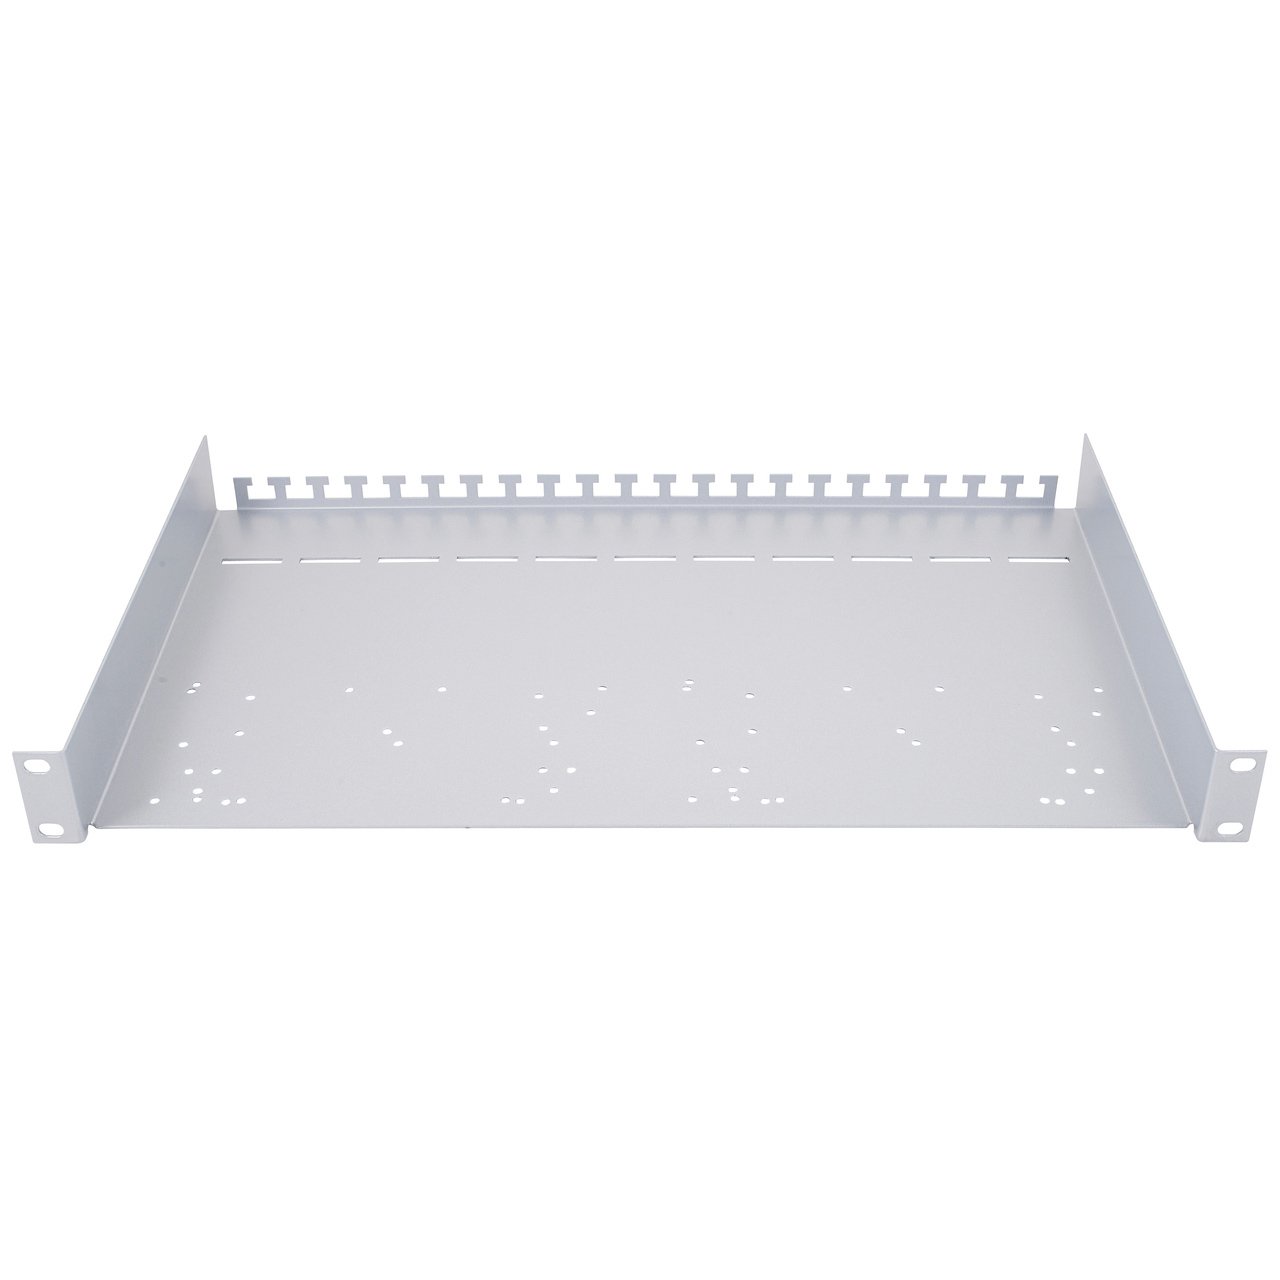 Outboard Accessories - ALVA Unirack 19 - Universal Rack-Mount Tray For Compatible RME Devices